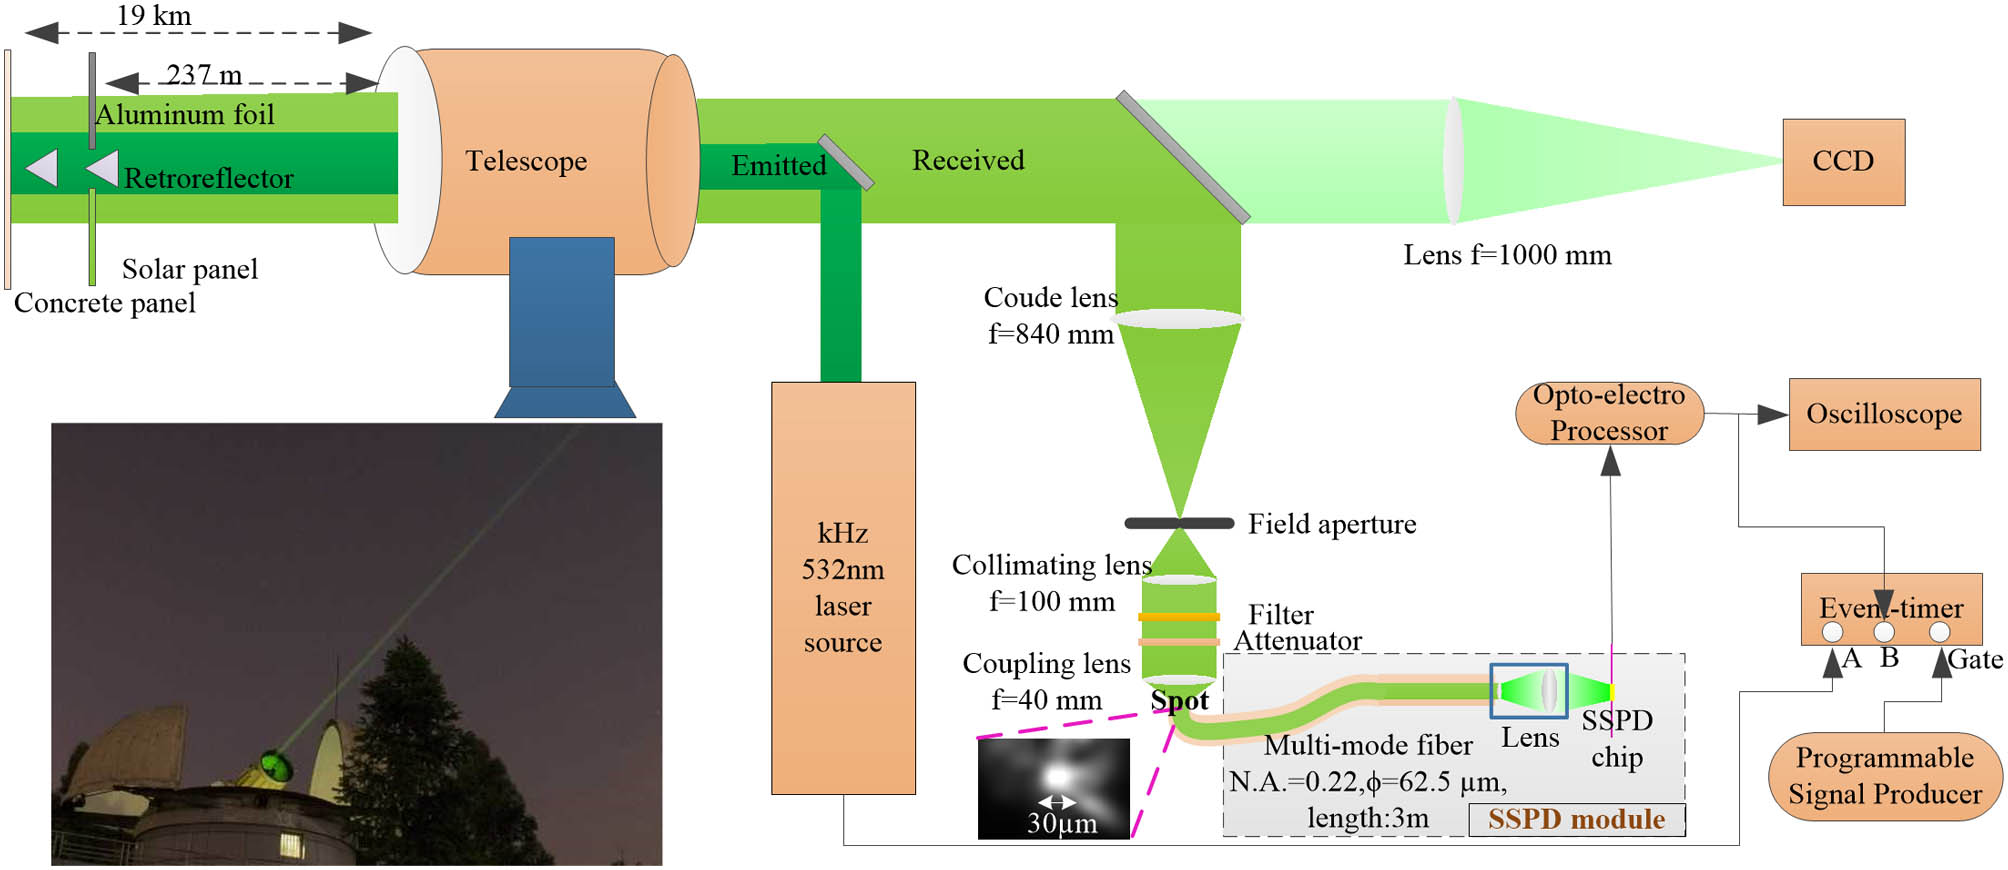 Scheme of the coaxial optical system layout and laser-ranging experiments. The receiving optics are designed to meet the requirements of the allowed focus spot size and the allowed divergence angle of the incident light from the multi-mode fiber.